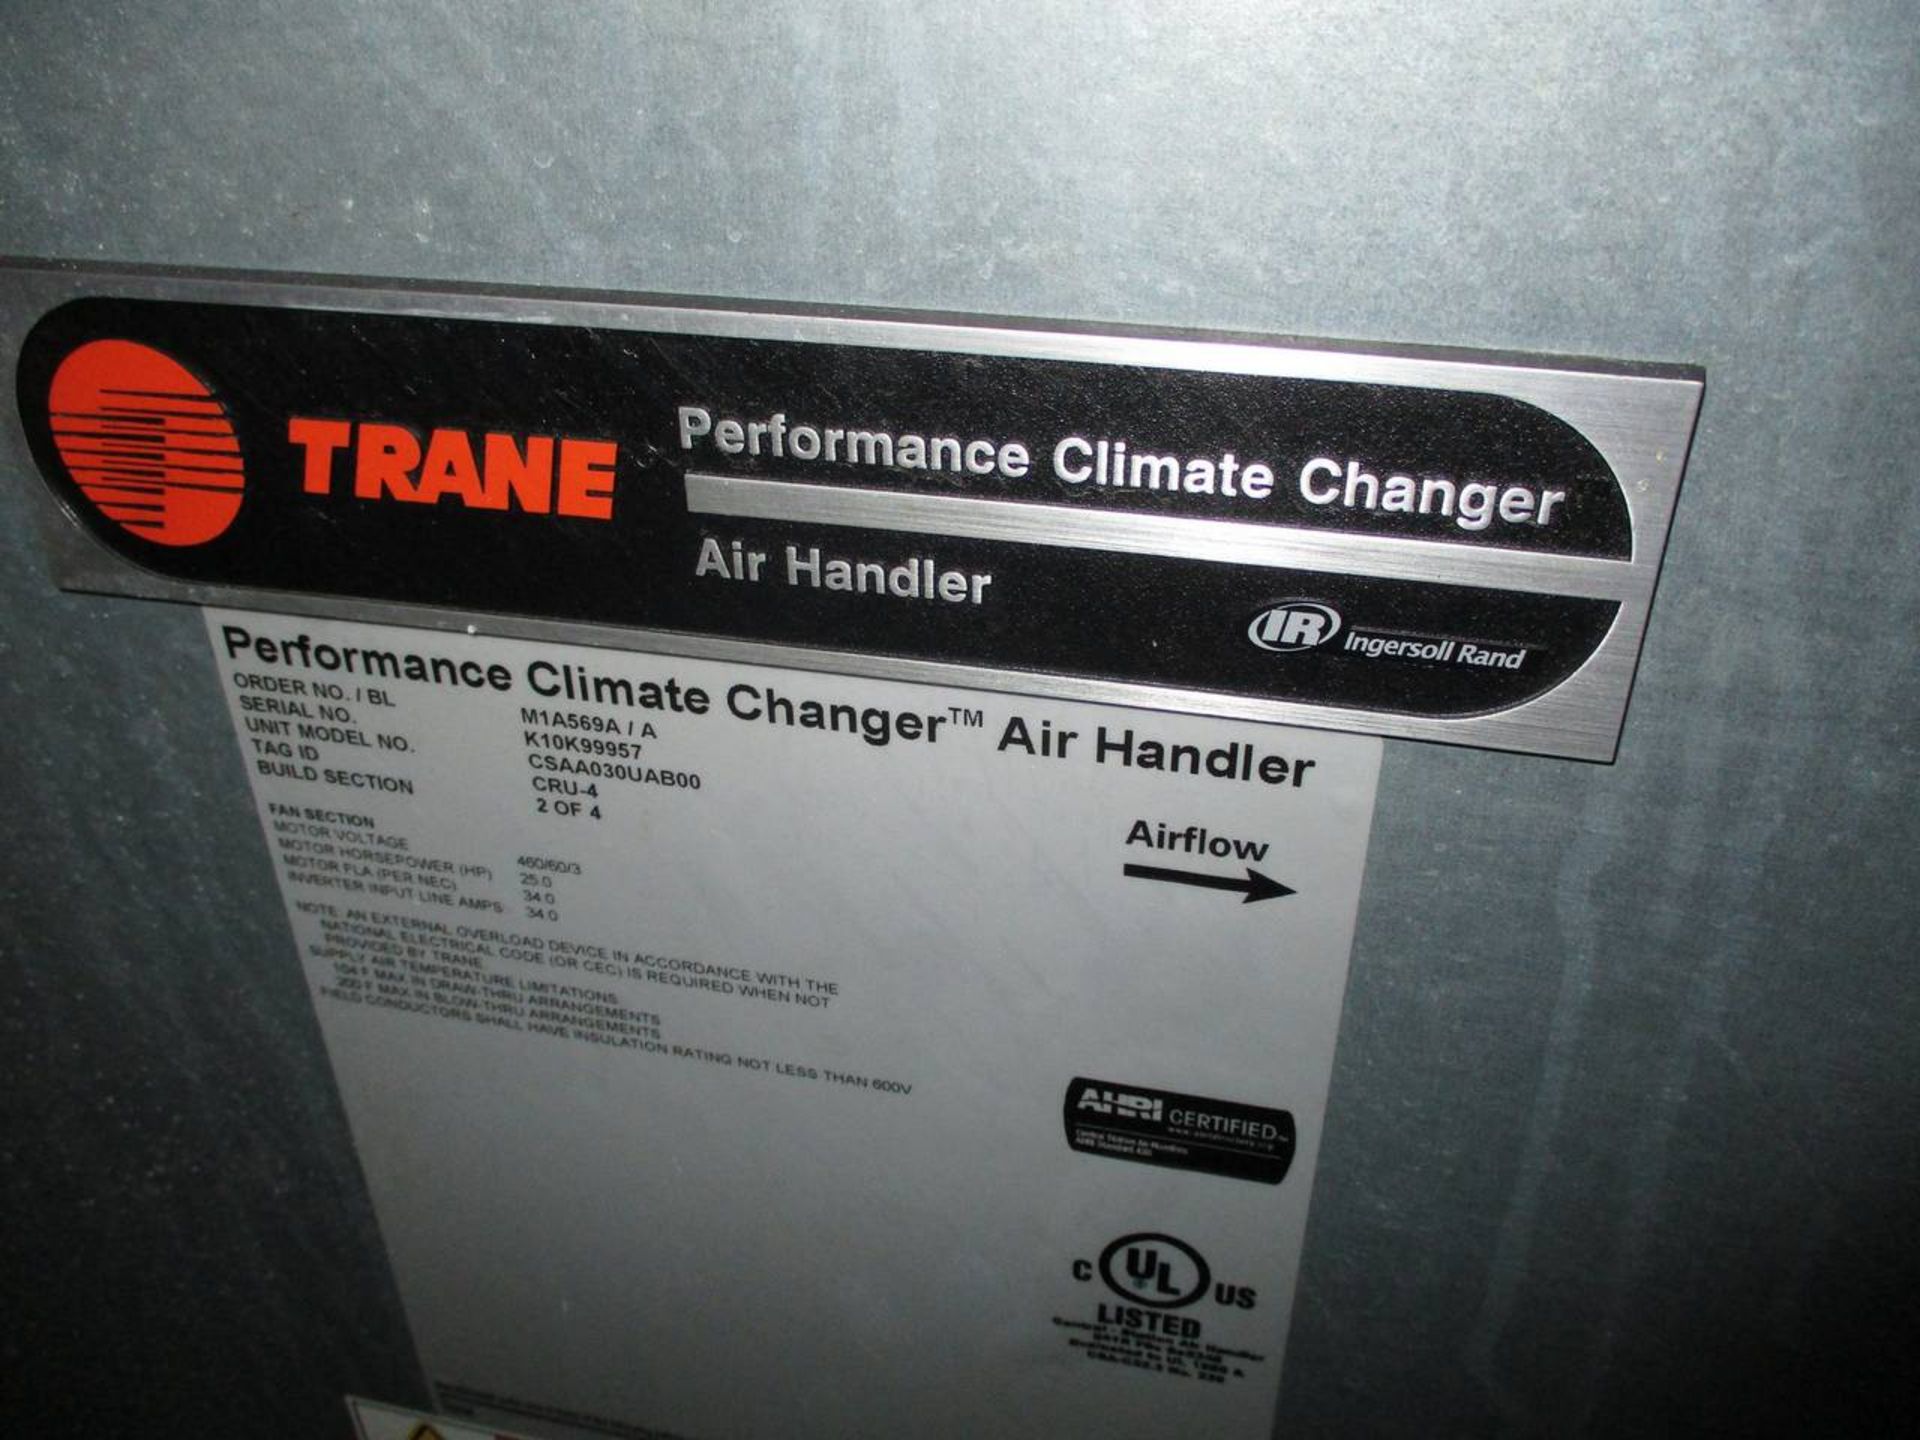 2010 Trane Performance Climate Changer Air Hander - Image 4 of 6